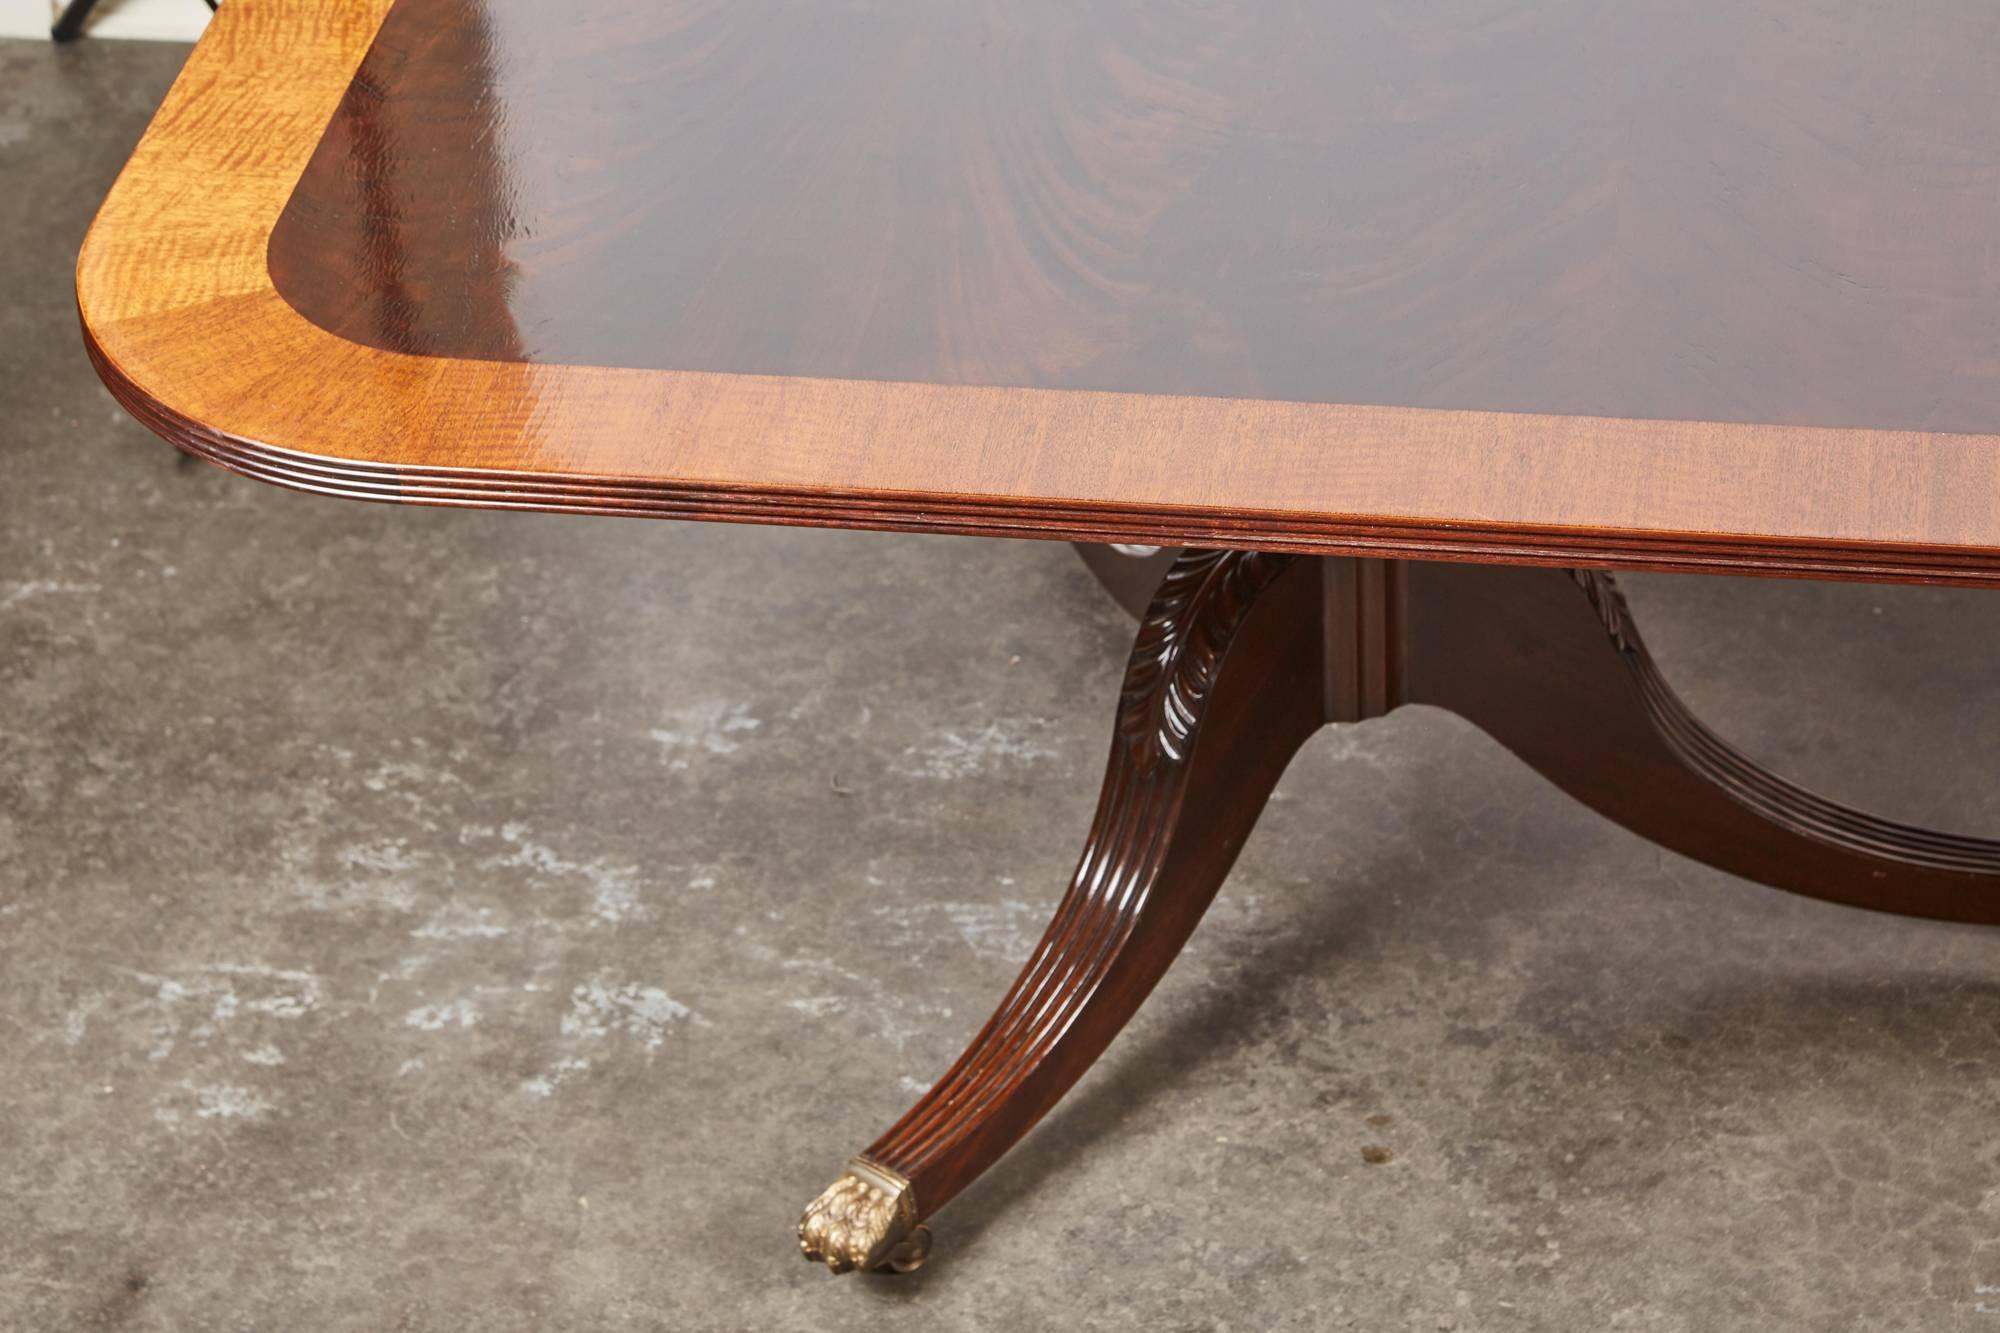 English Regency Style Double Pedestal Dining Table In Good Condition For Sale In Pasadena, CA